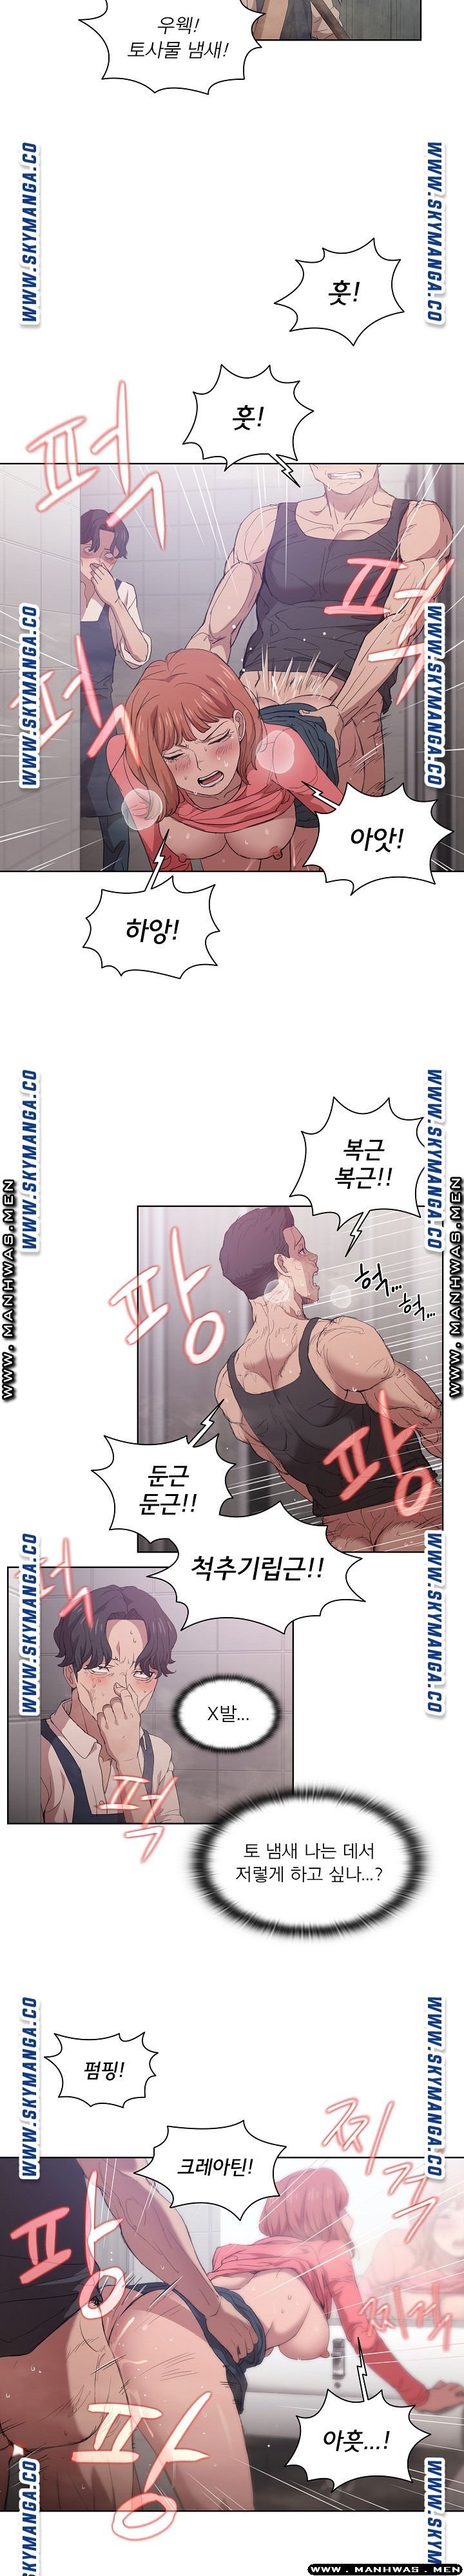 how-about-getting-lost-raw-chap-8-5